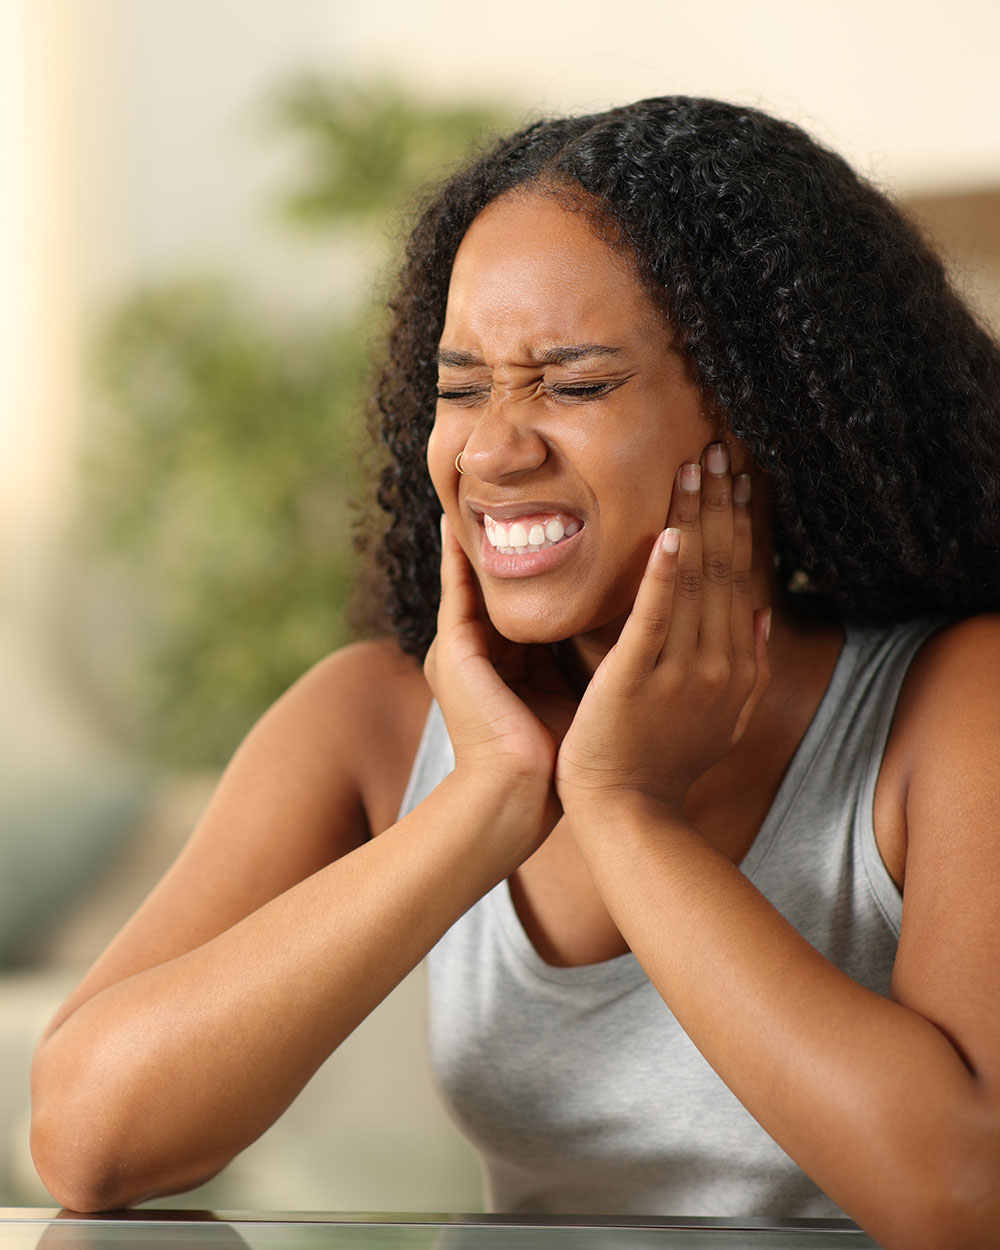 A woman dealing with tooth and jaw pain.